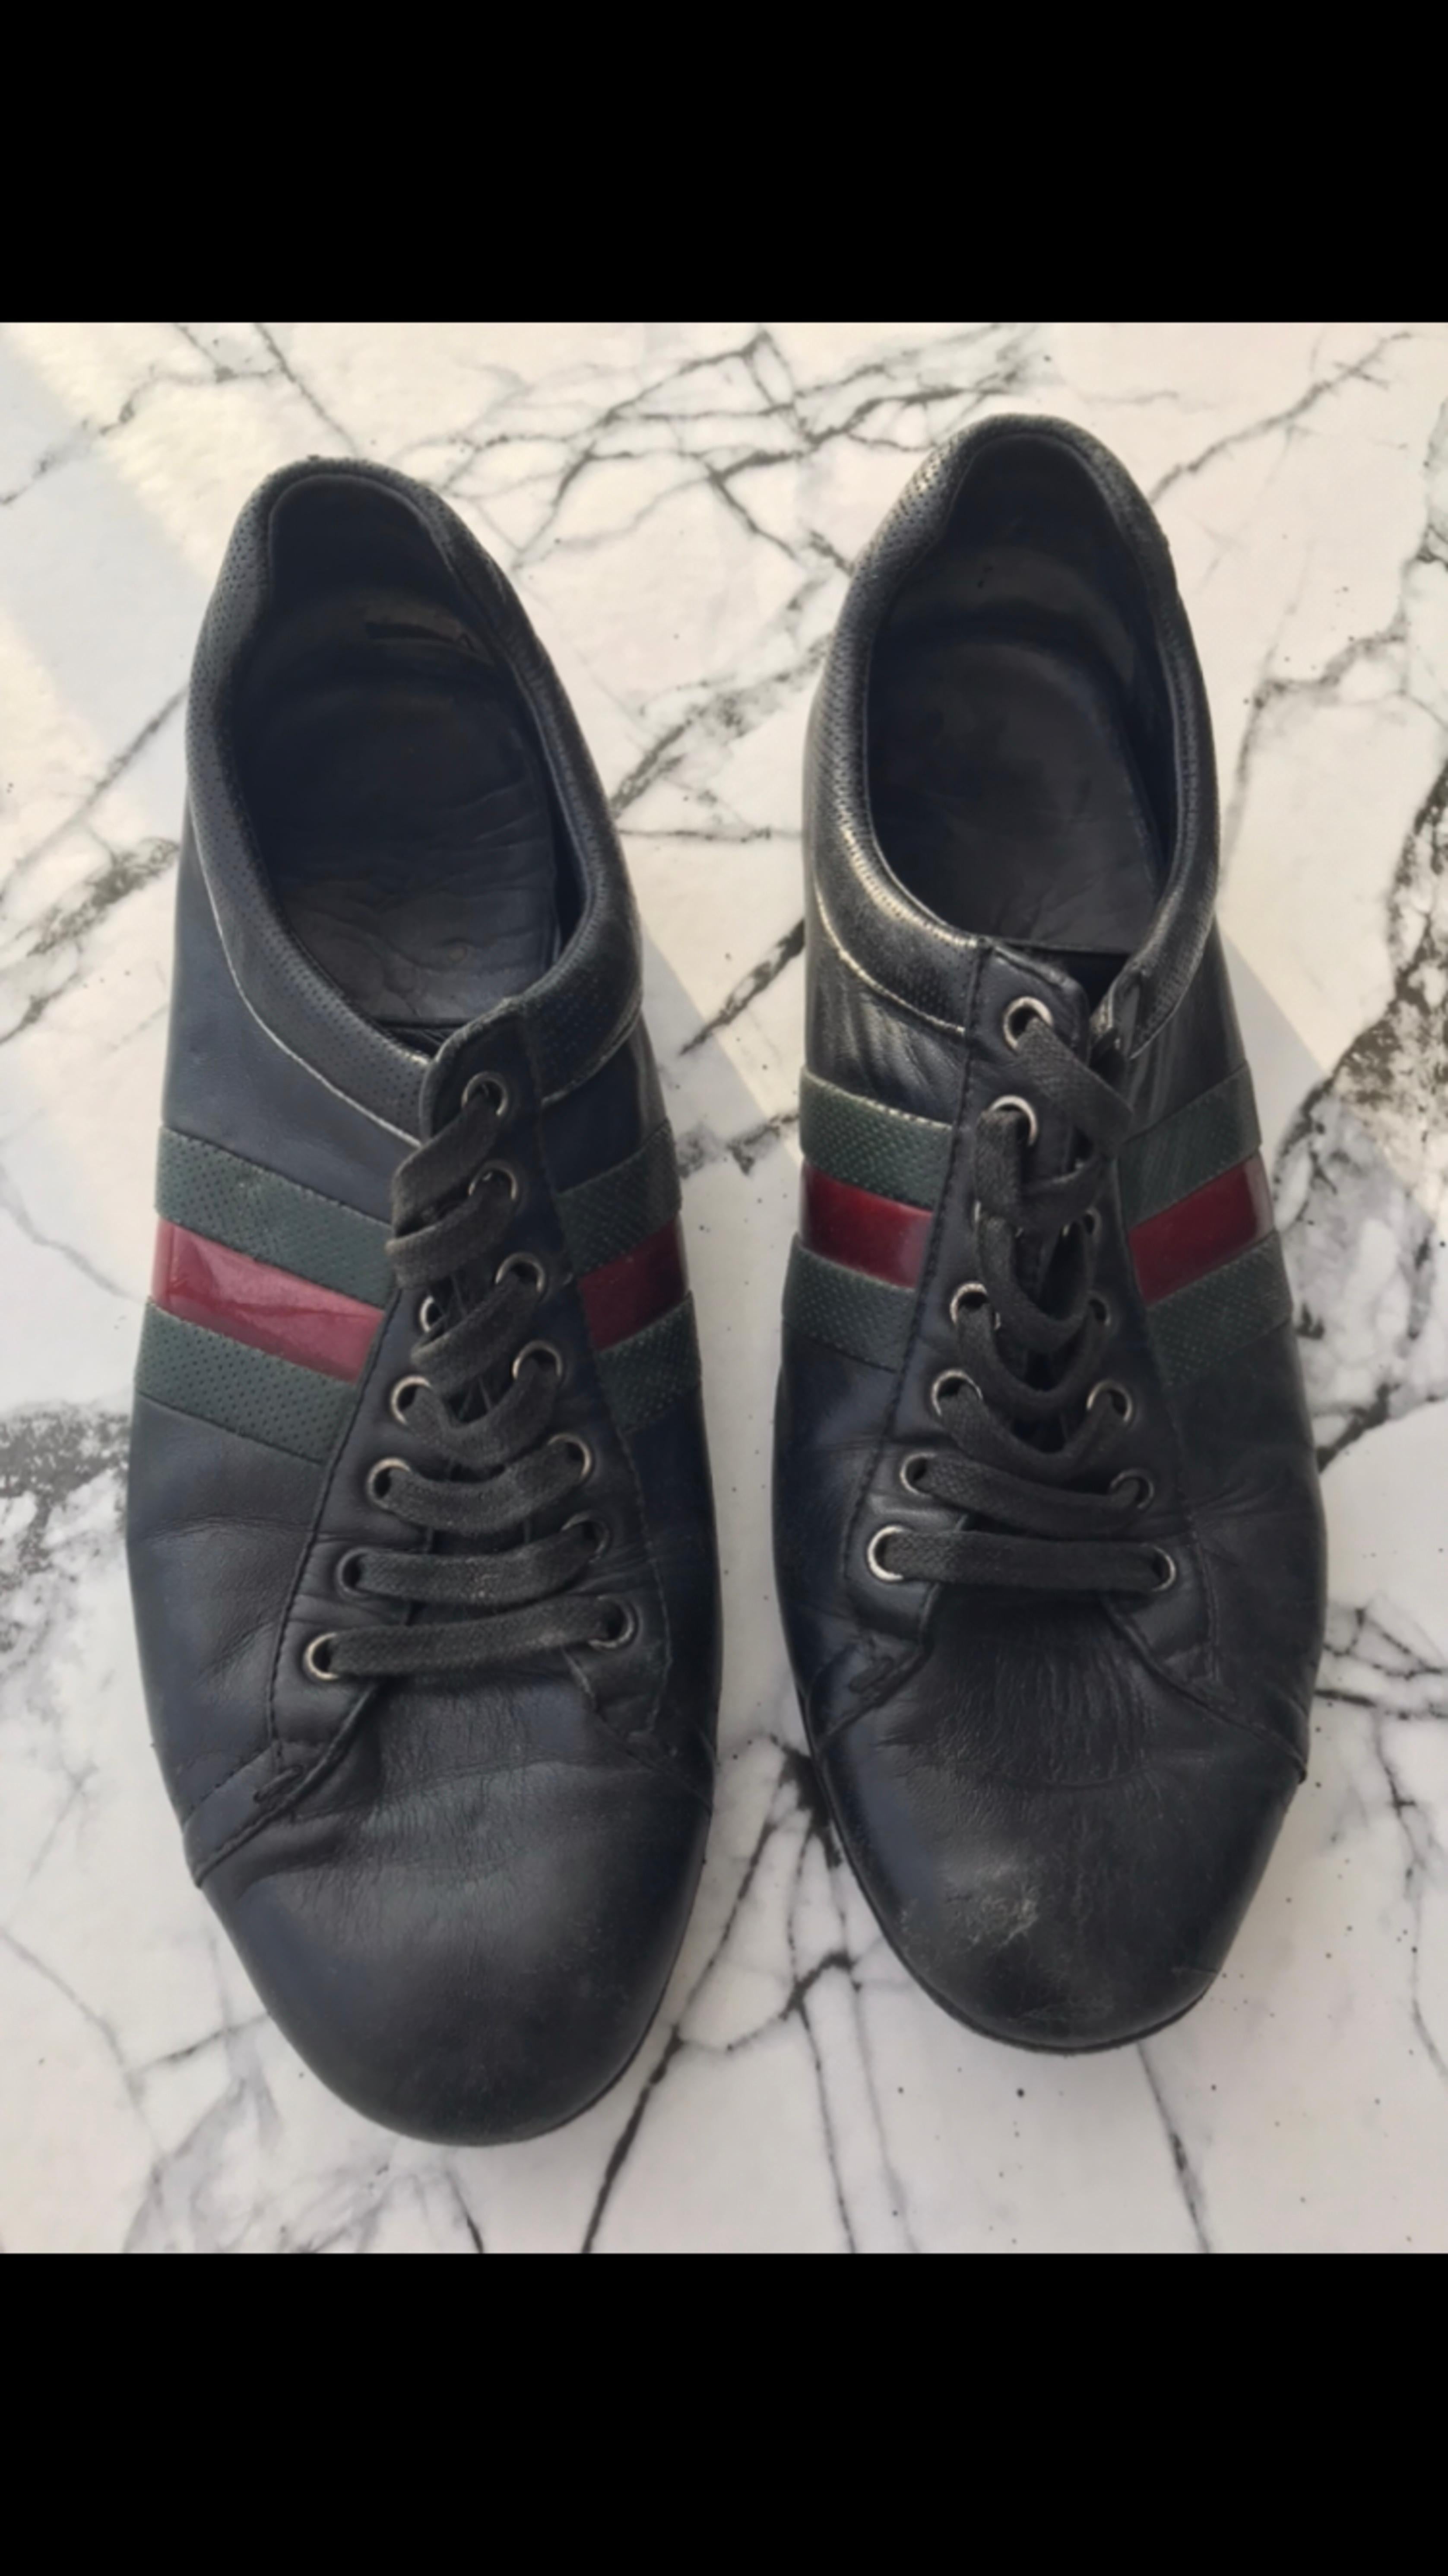 Gucci men's sneakers were previously used, color black, satisfactory condition, size 7, condition in photo